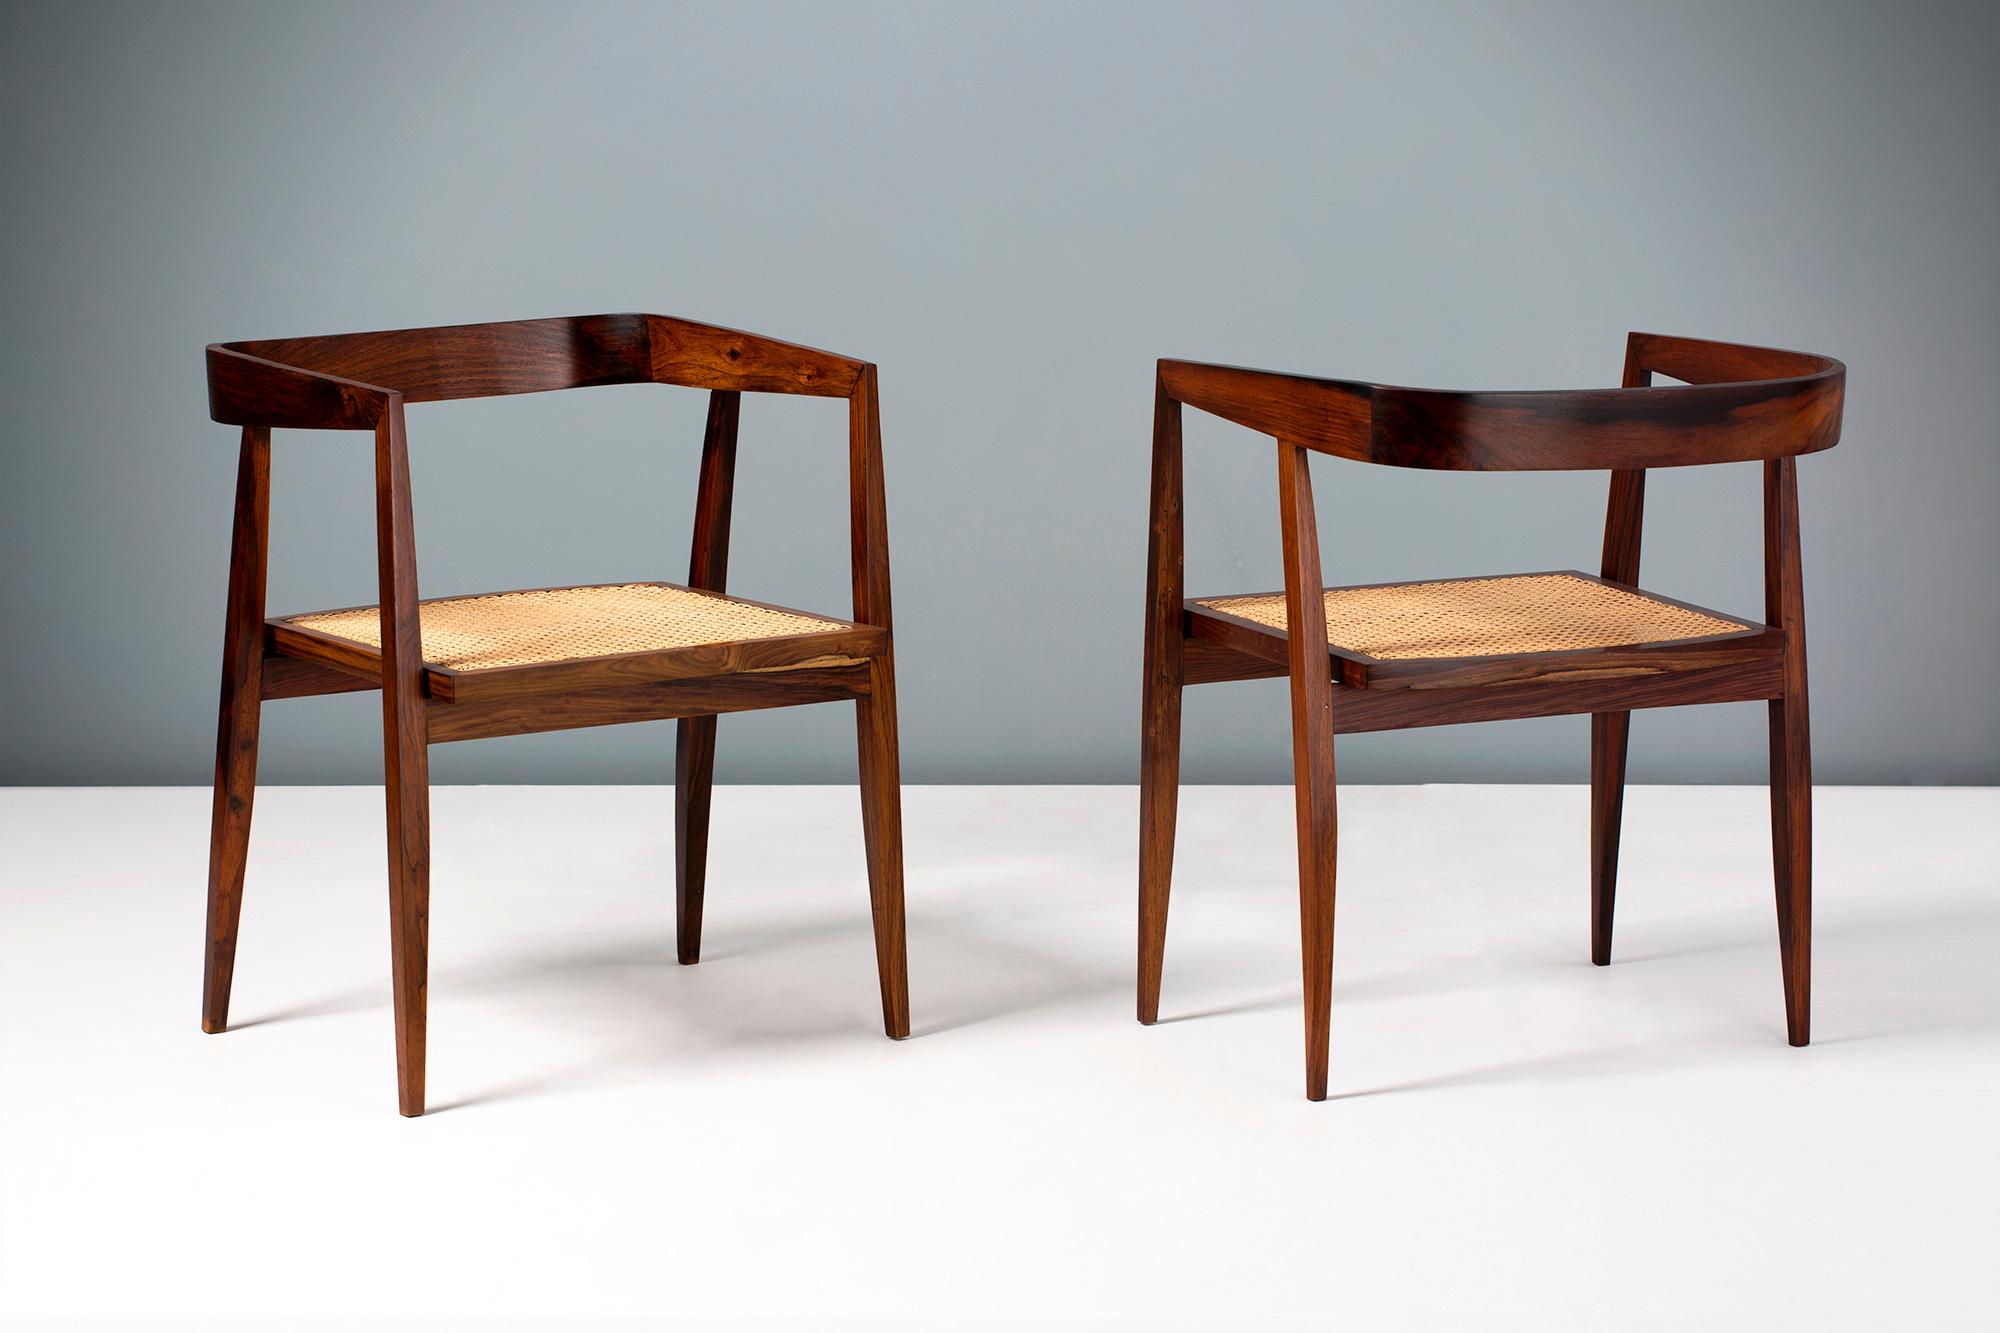 Joaquim Tenreiro 

(Brazilian, 1906-1992) 

Pair of armchairs produced in Pau Ferro wood (Santos Rosewood) and cane in the 1960s.

One of Tenreiro's most collectible and sought after chairs. This example is in immaculate condition with no